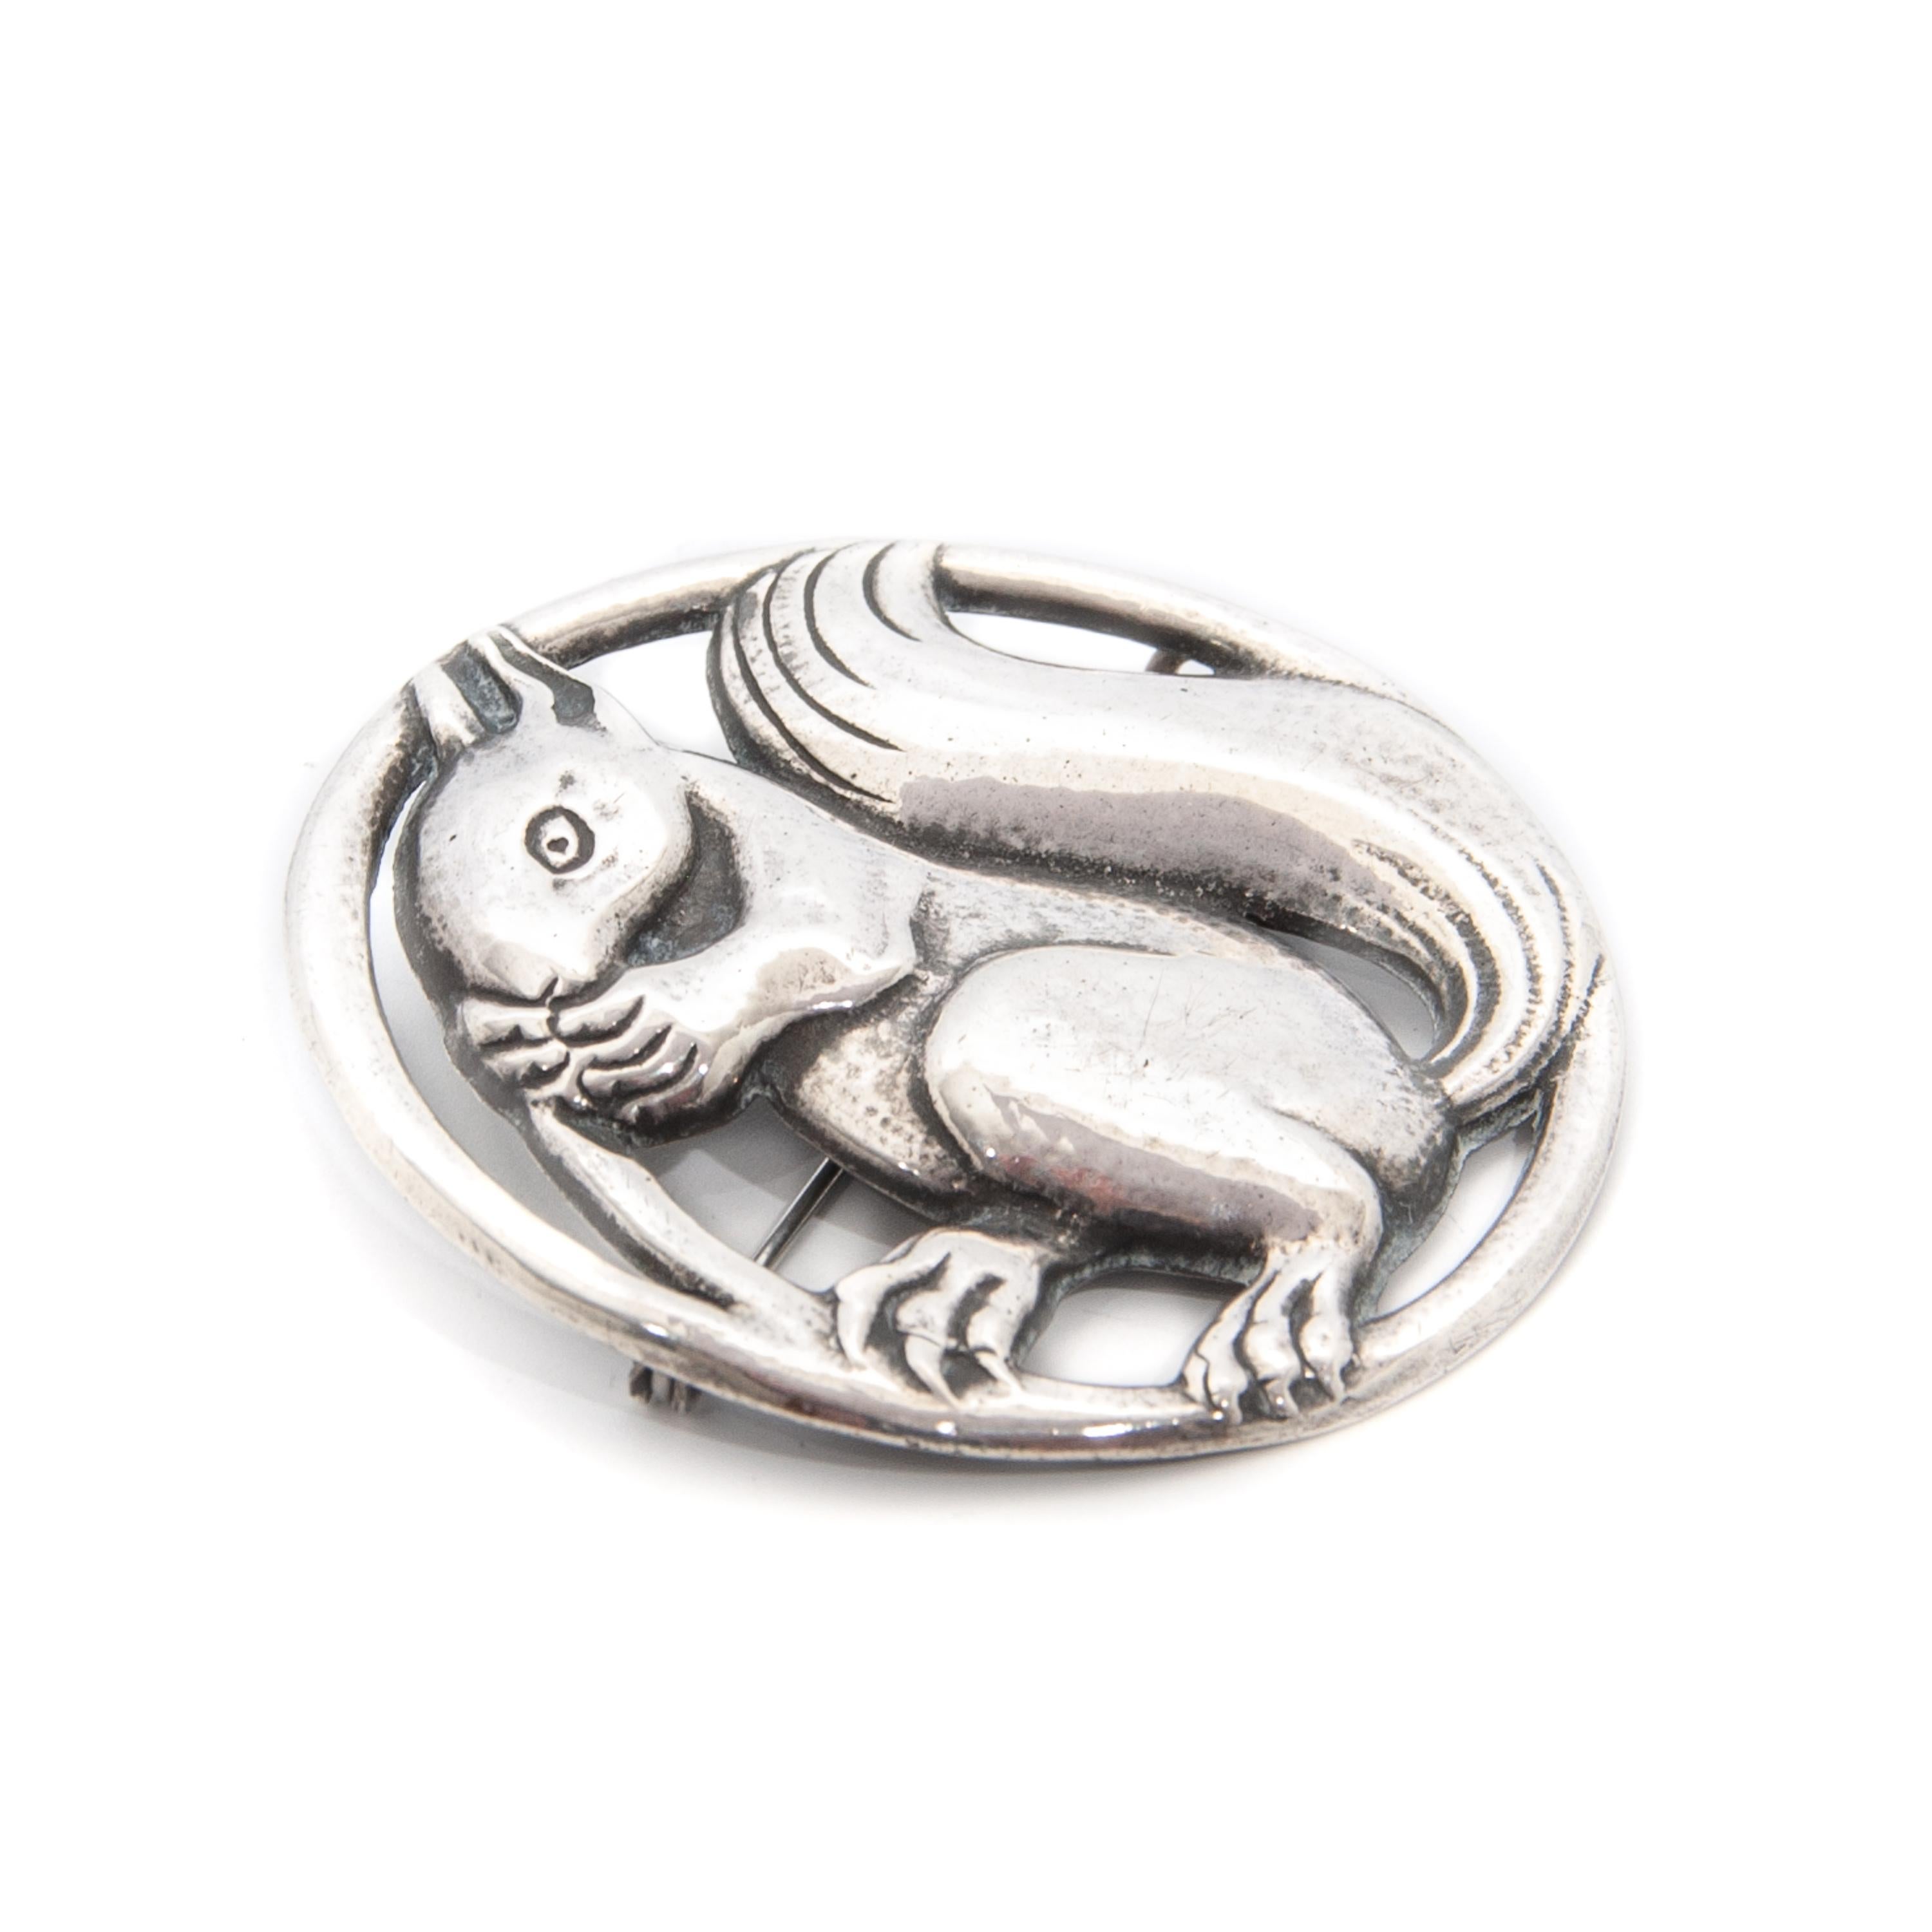 A lovely vintage silver round squirrel brooch. The brooch is made of polished silver and beautifully stylized, while the line engravings of the cute animal have a natural patina. The squirrel is resting on a branch and eating an acorn. At the back